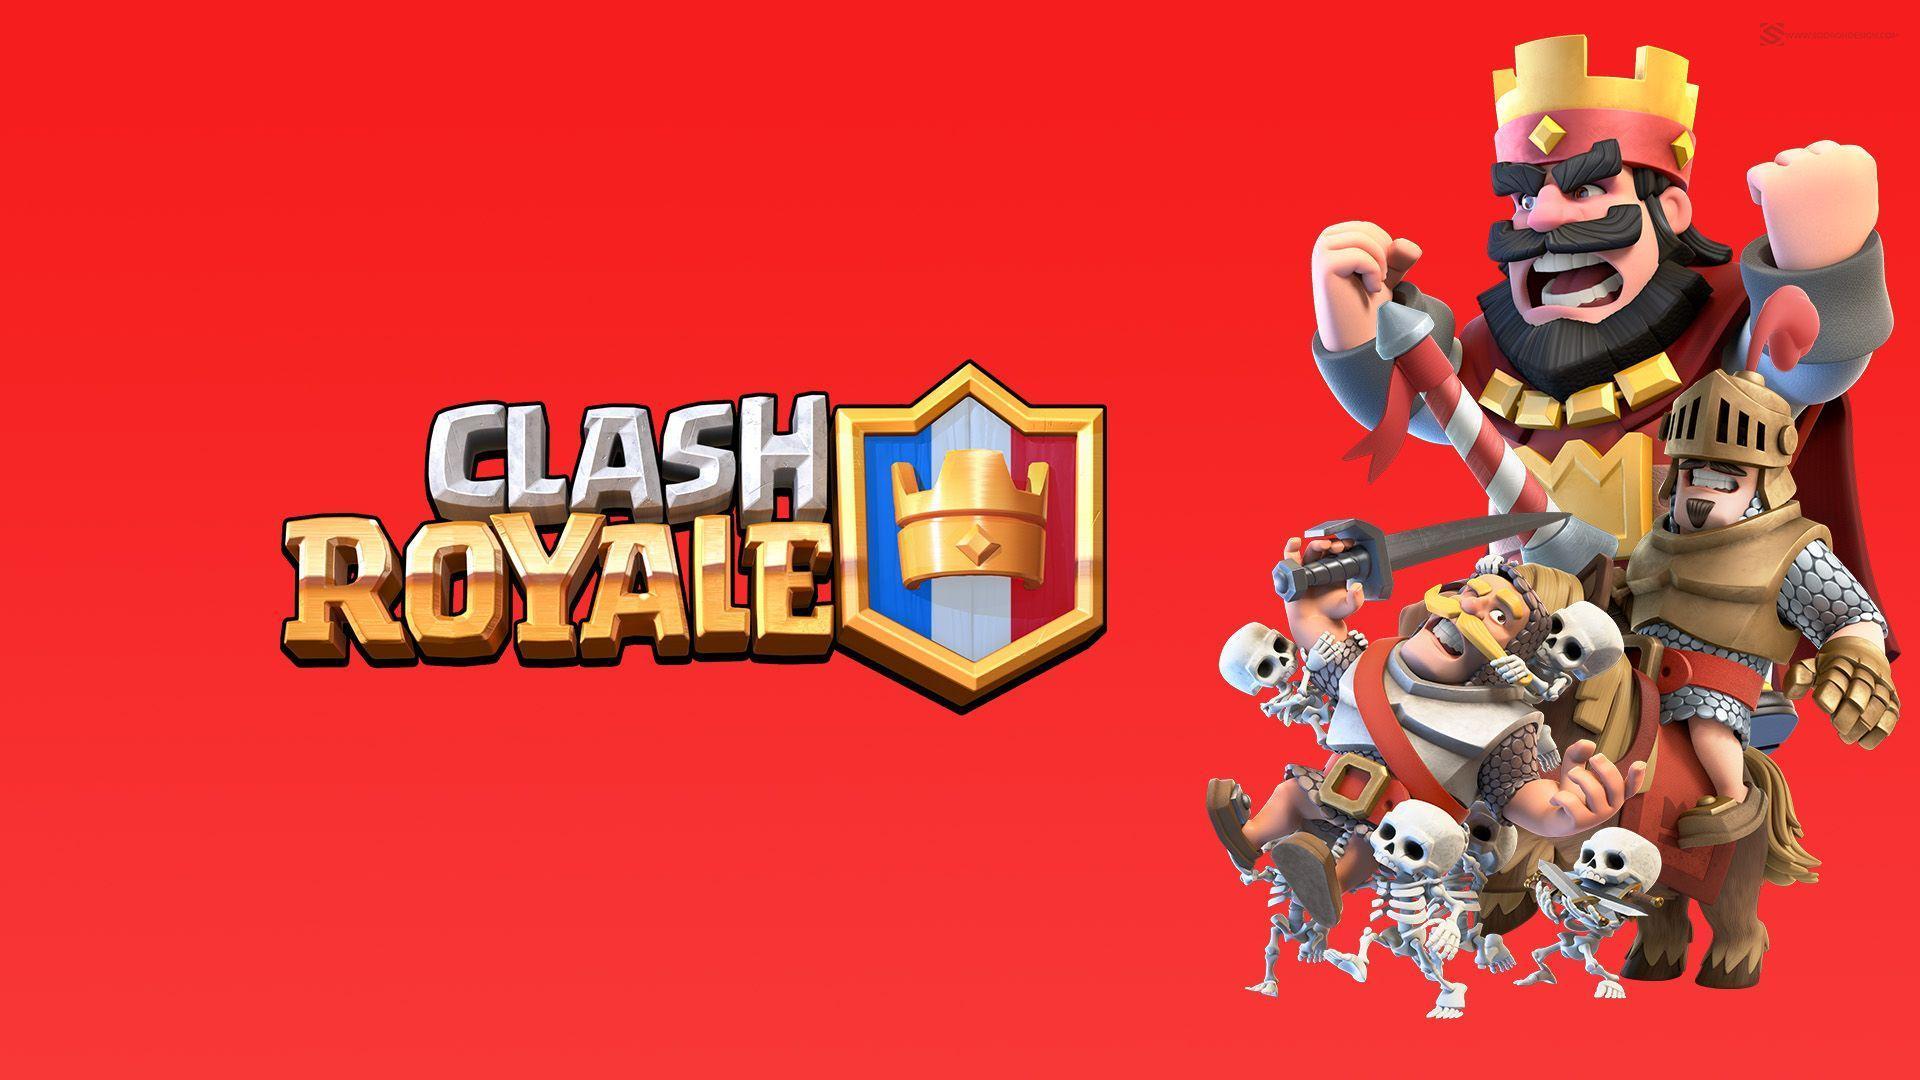 Backgrounds Clash Royale HD Wallpapers